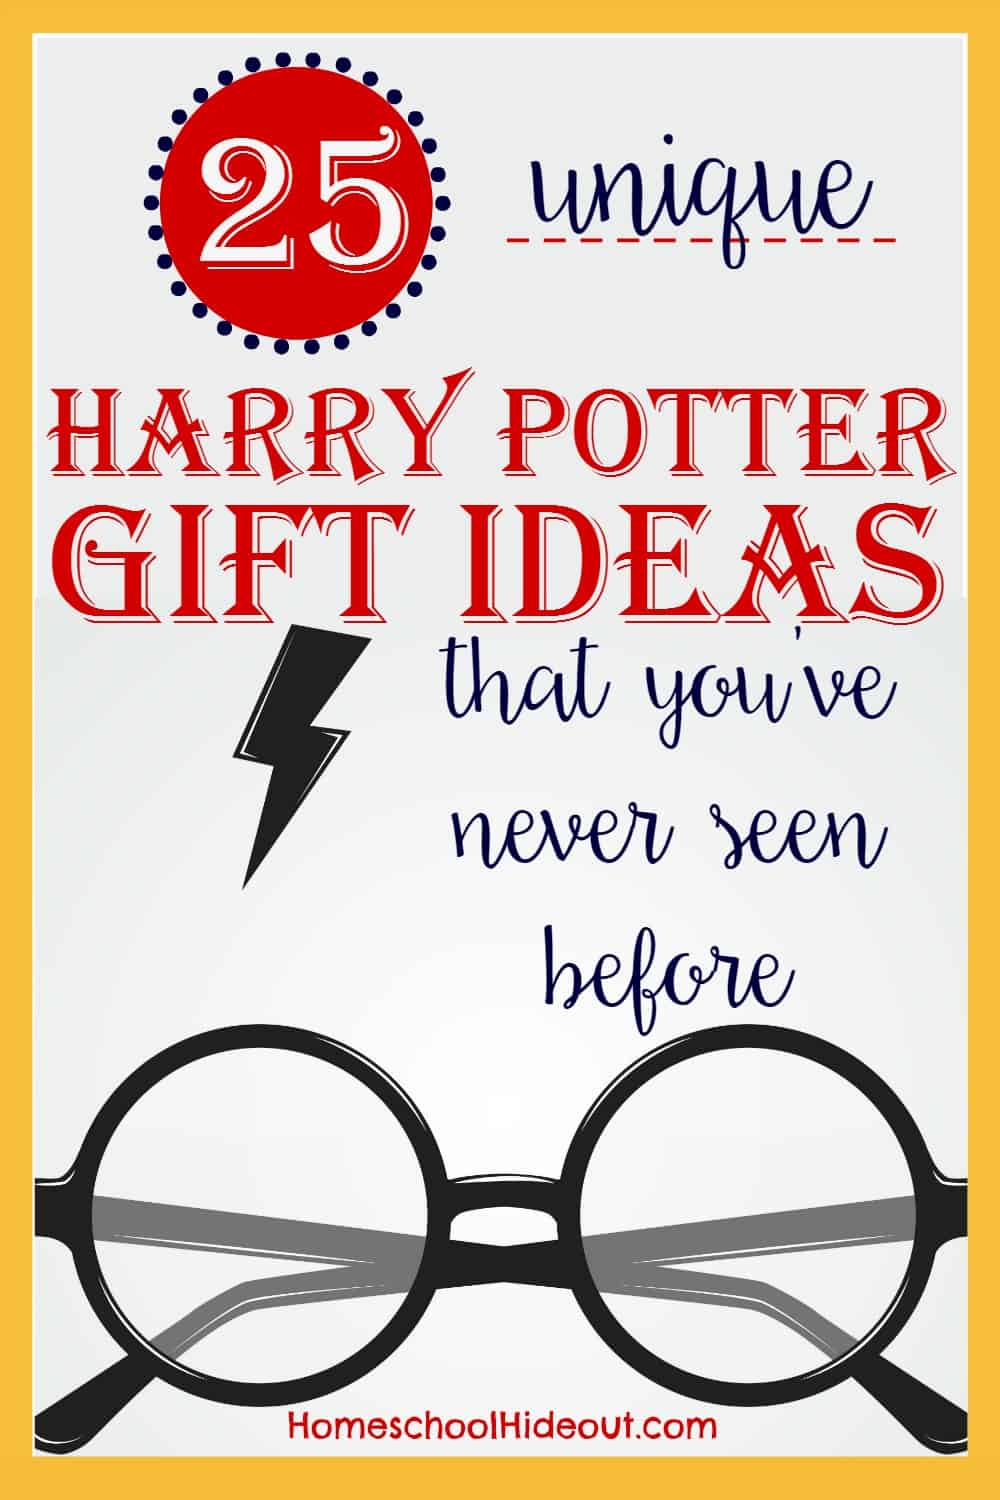 The ultimate list of Harry Potter gift ideas! I've never seen some of these items and can't wait for them to show up in my mailbox! Ordering #16 right NOW!